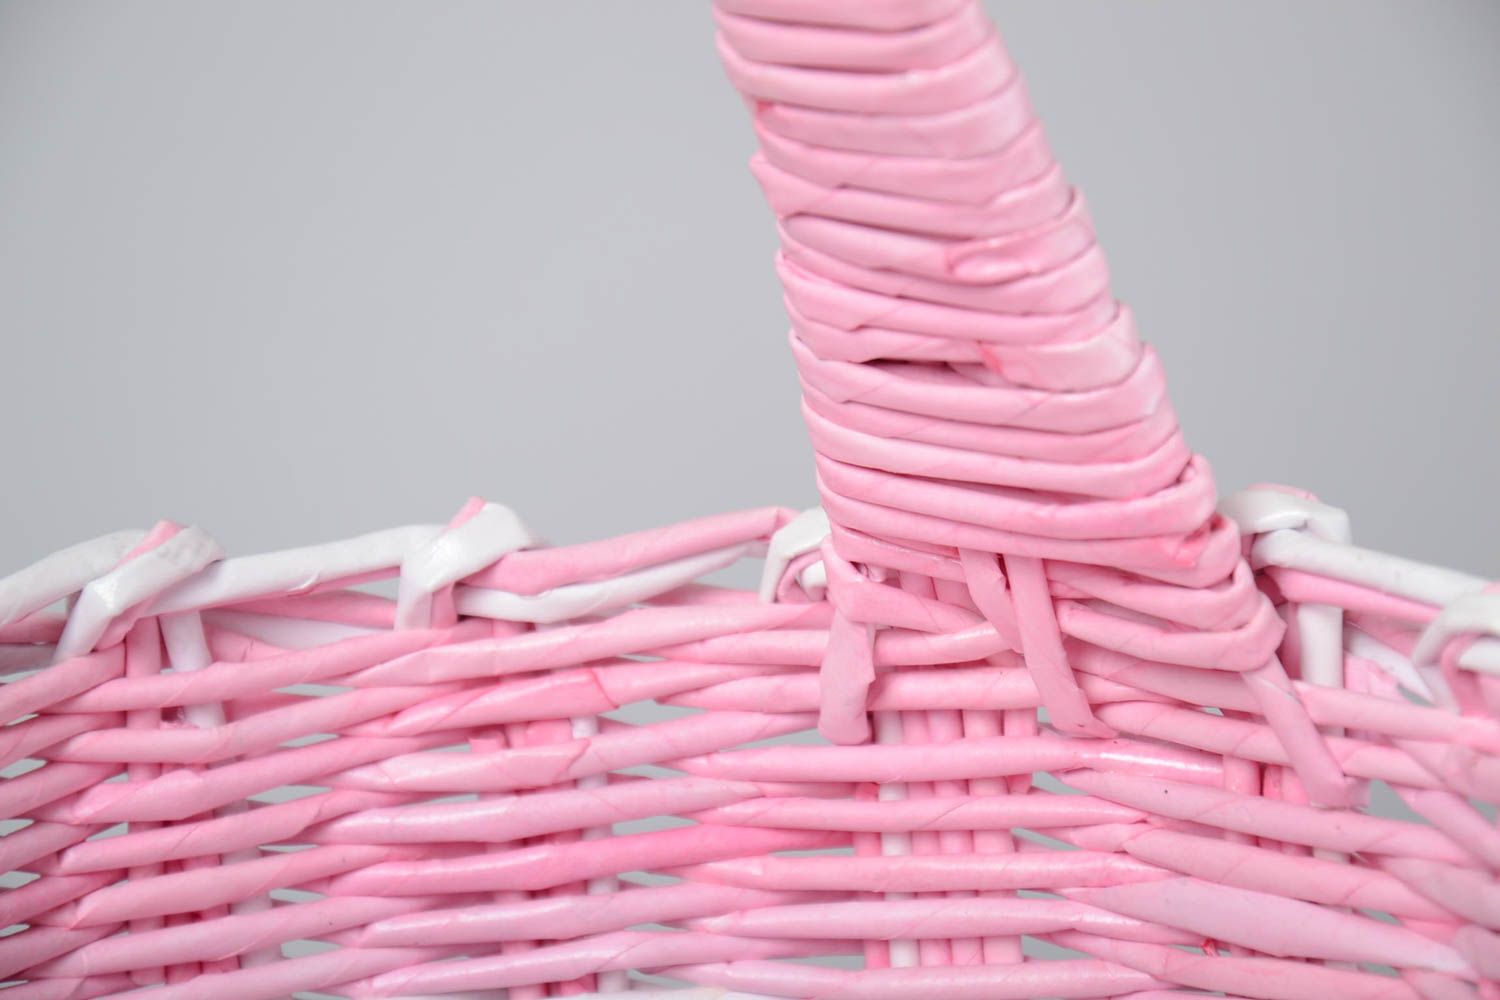 Woven basket made of paper rod small pink with white handmade photo 5